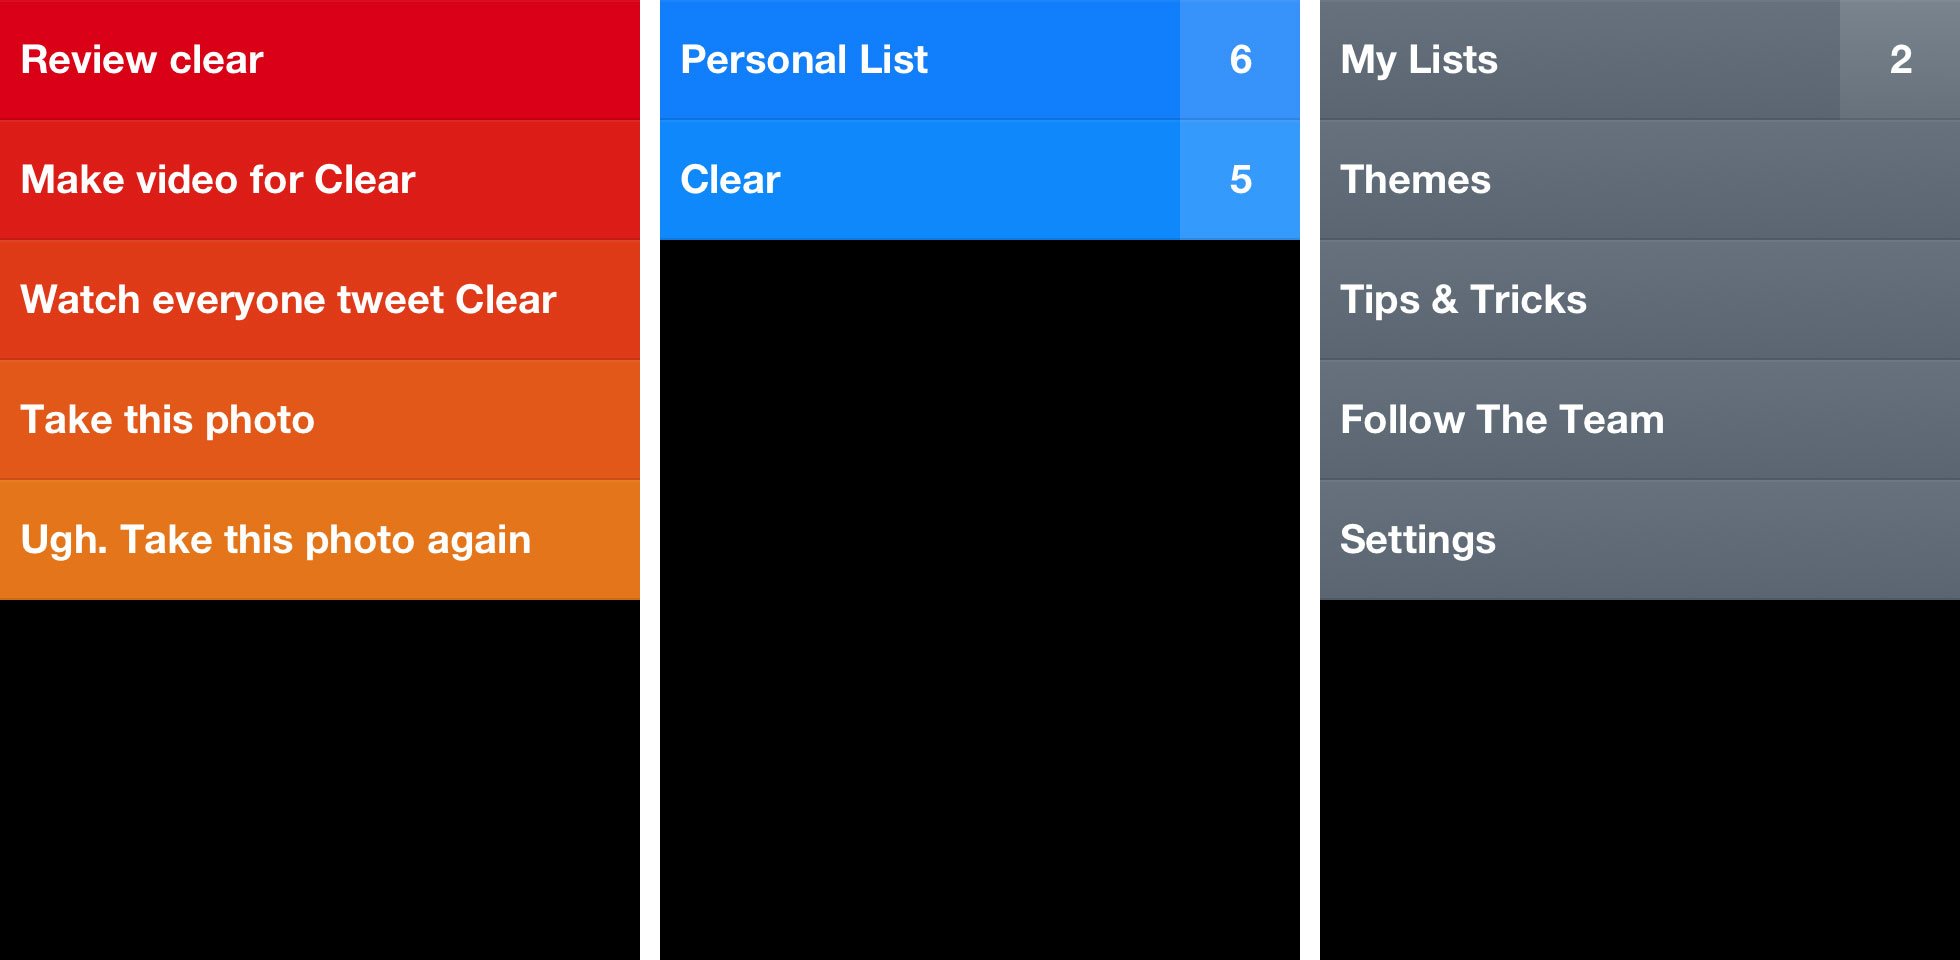 Items, lists (of items), and the menu are the three simple layers that comprise clear